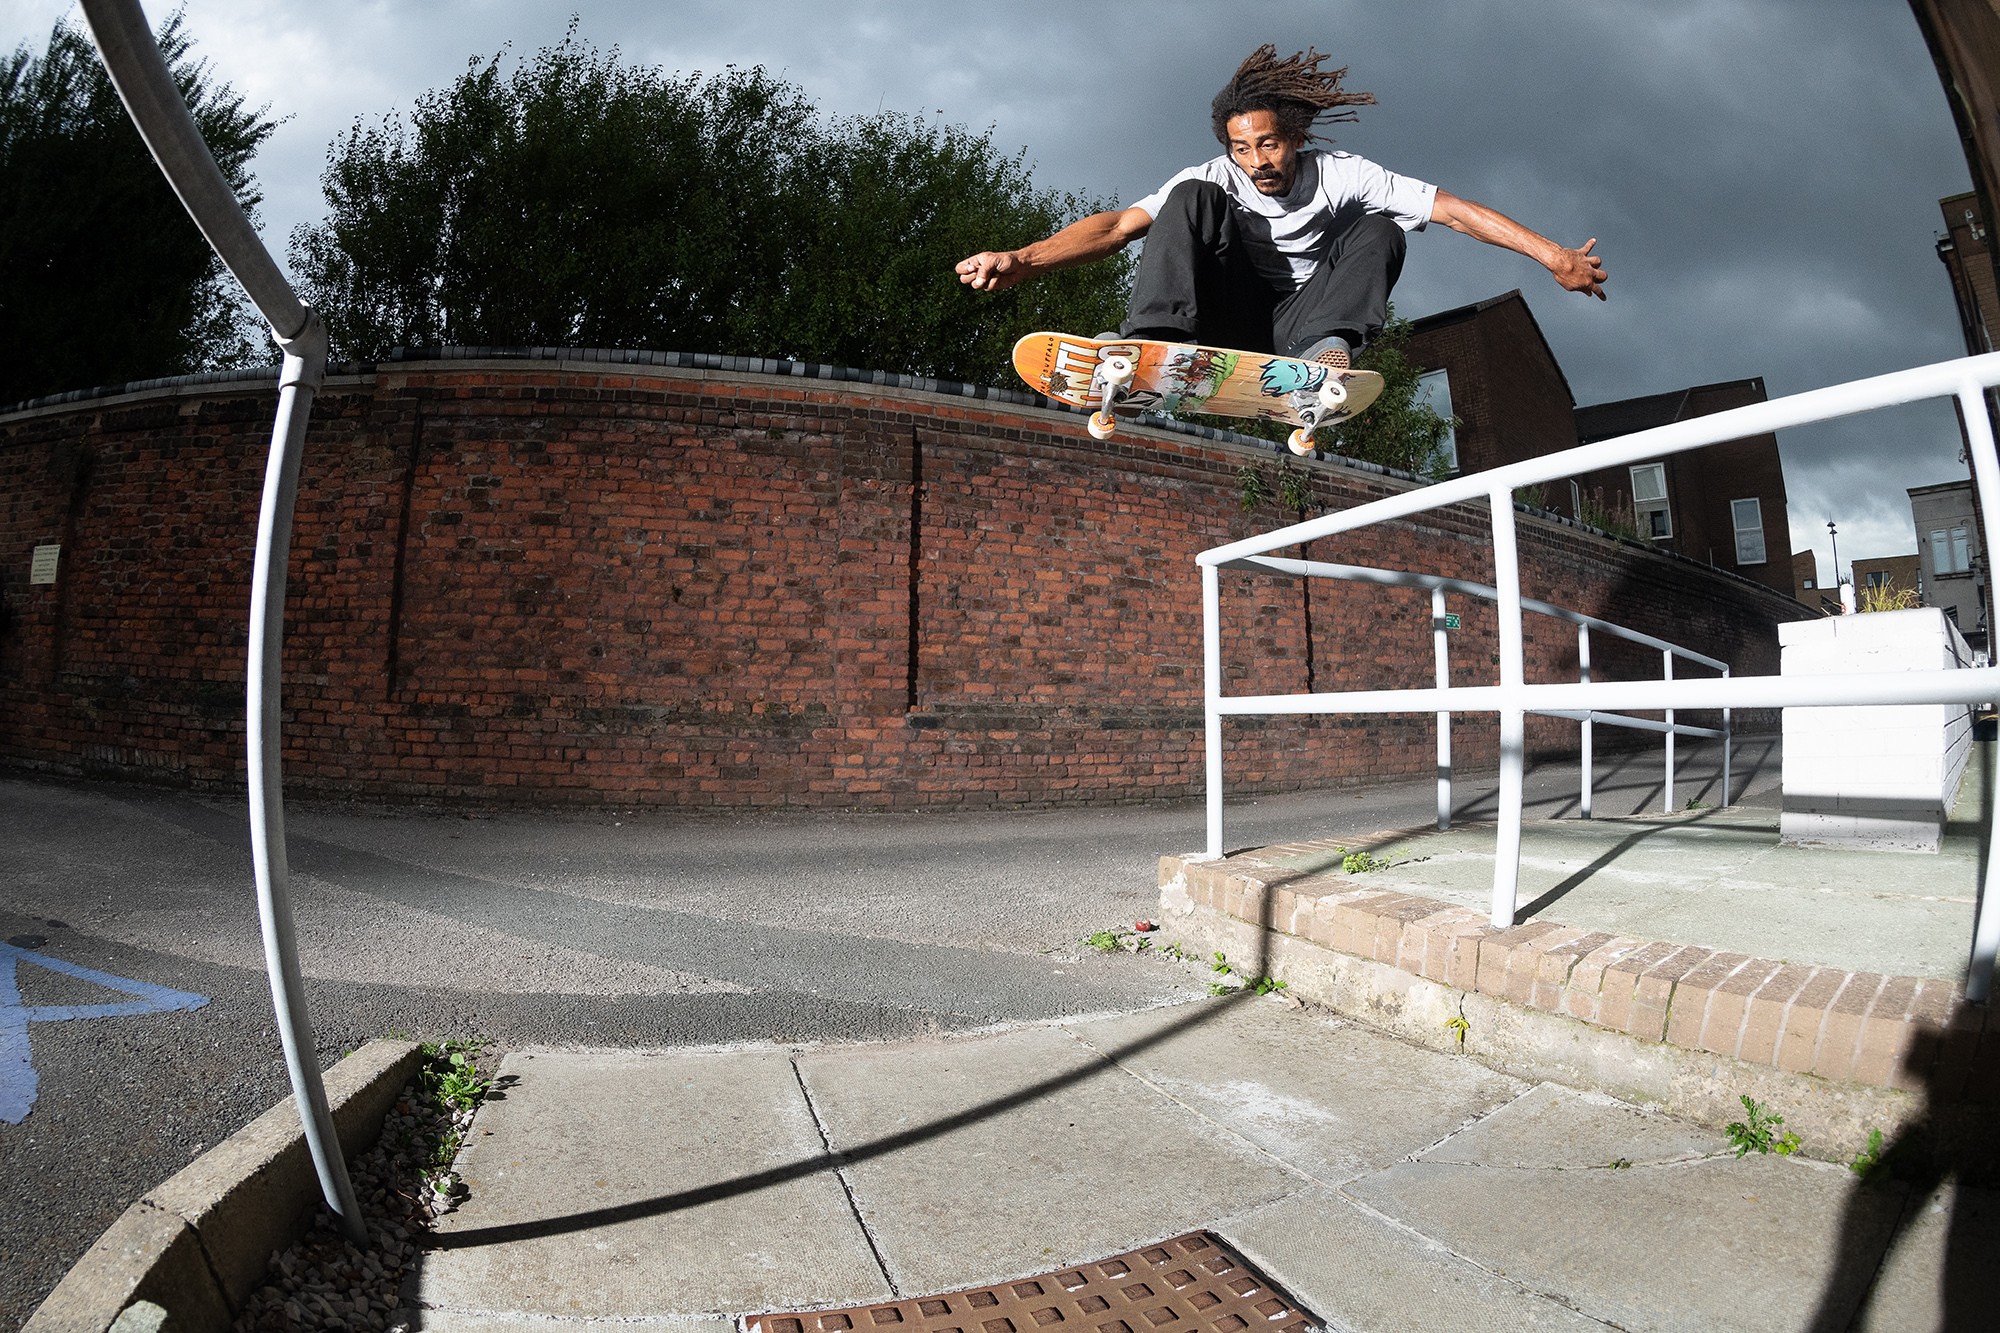  DSC1527 pfanner ollie over rail and curb 18 UK brook DZ 2000